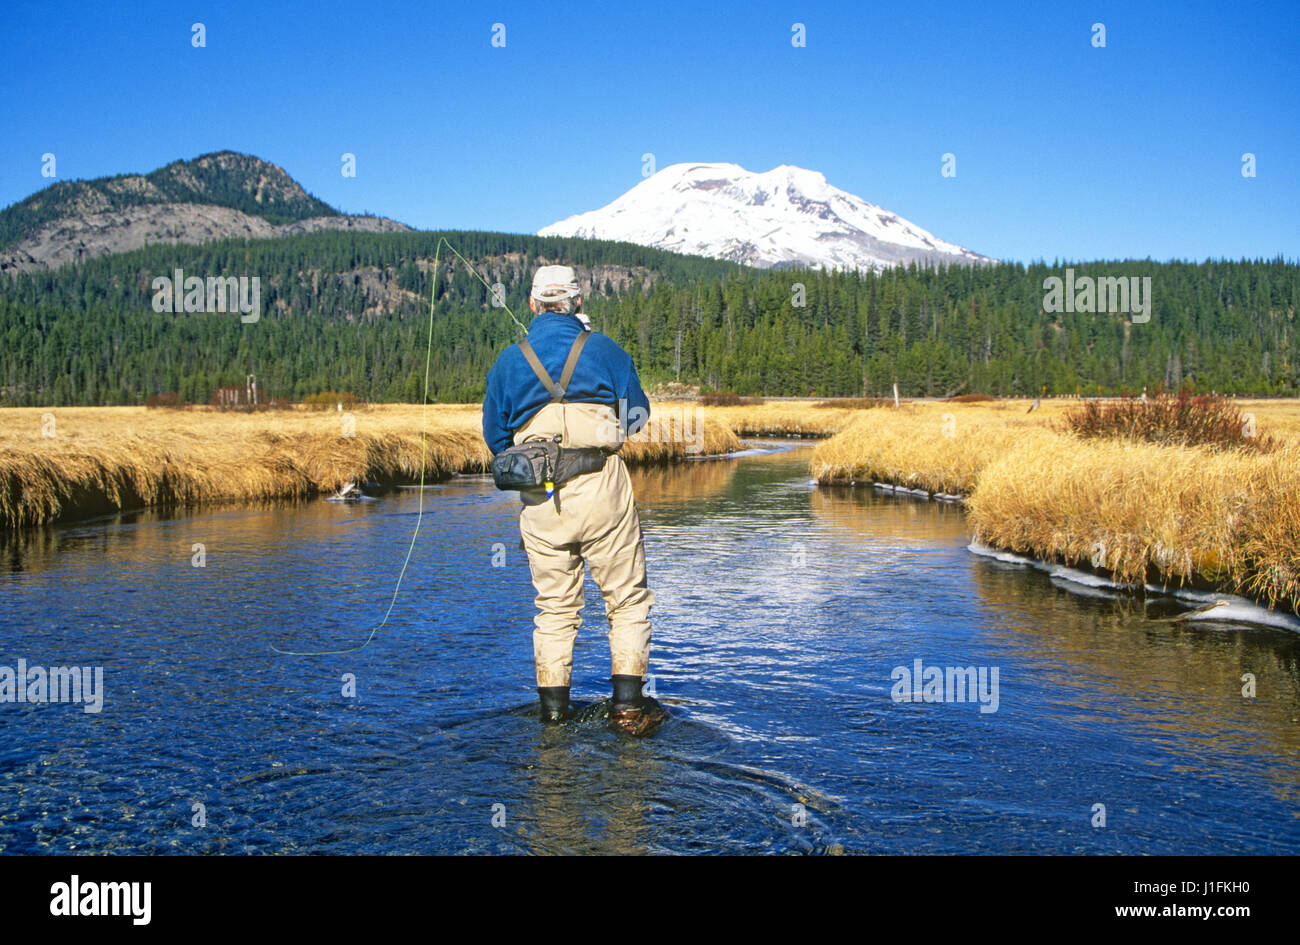 https://c8.alamy.com/comp/J1FKH0/fishing-for-spring-trout-in-the-oregon-cascades-on-the-cascade-lakes-J1FKH0.jpg